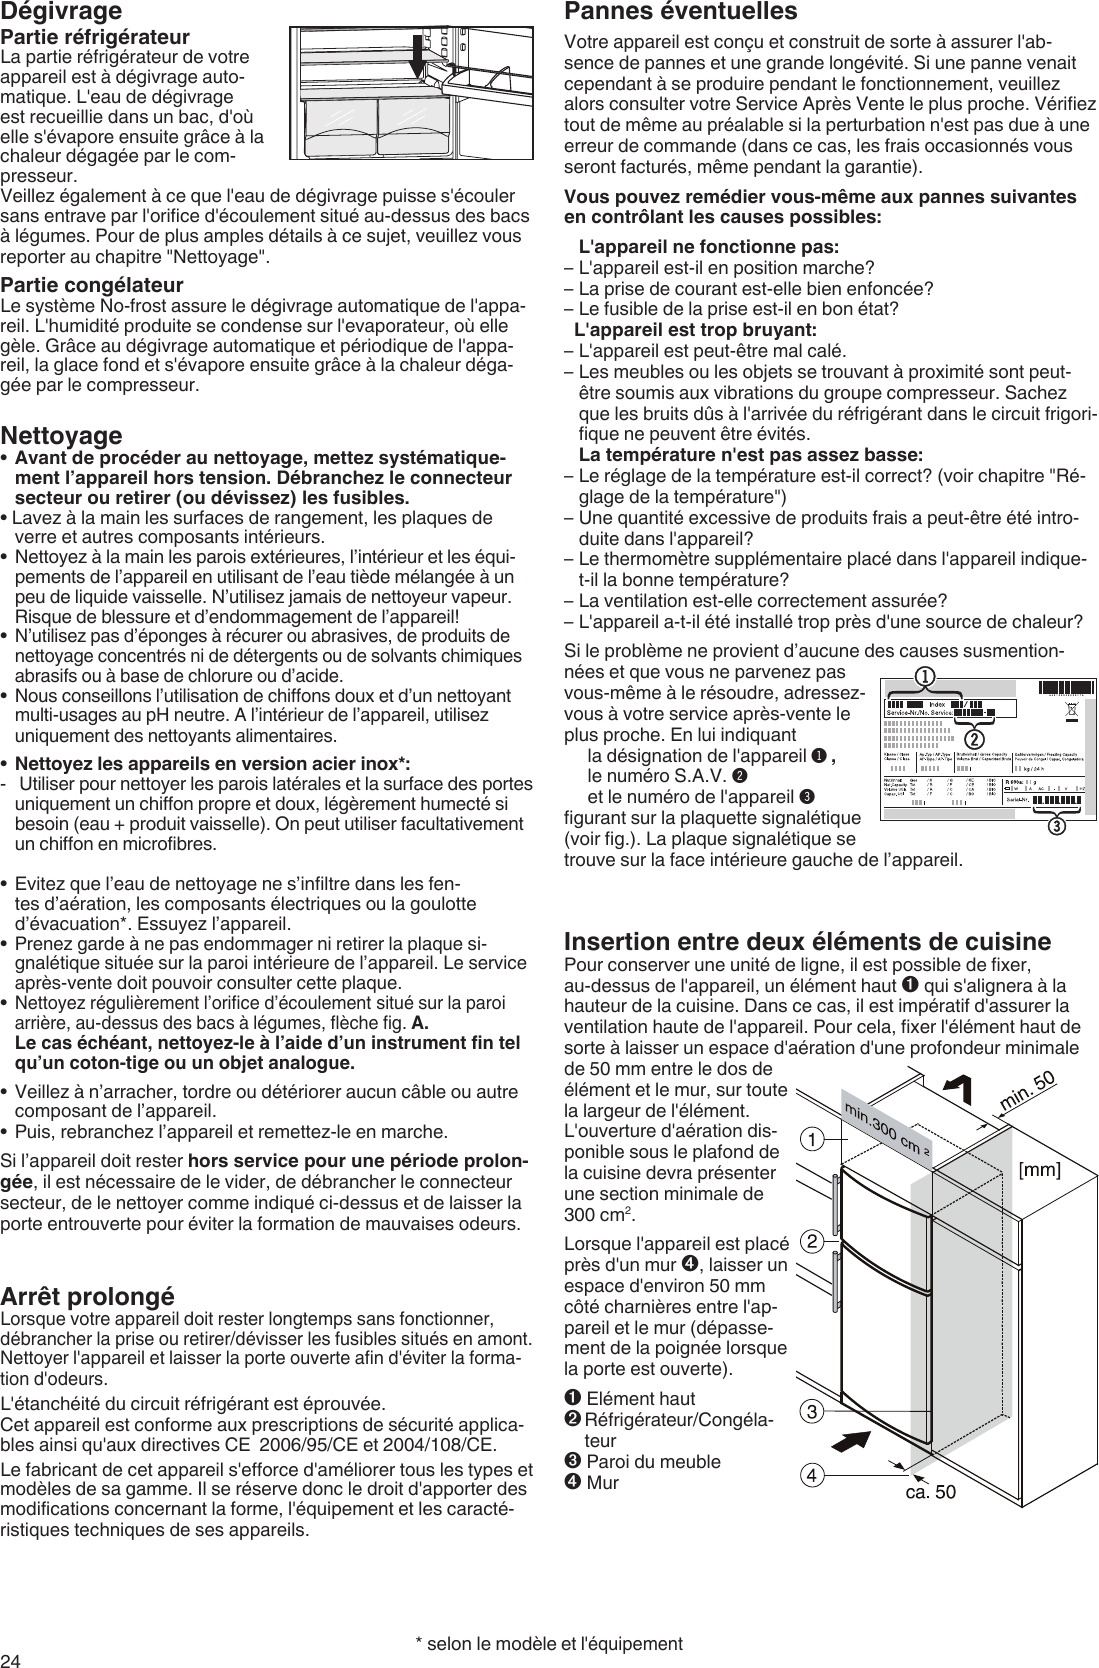 Page 6 of 7 - Liebherr Liebherr-Combined-Refrigerator-Freezer-Nofrost-7081-885-01-Users-Manual-  Liebherr-combined-refrigerator-freezer-nofrost-7081-885-01-users-manual